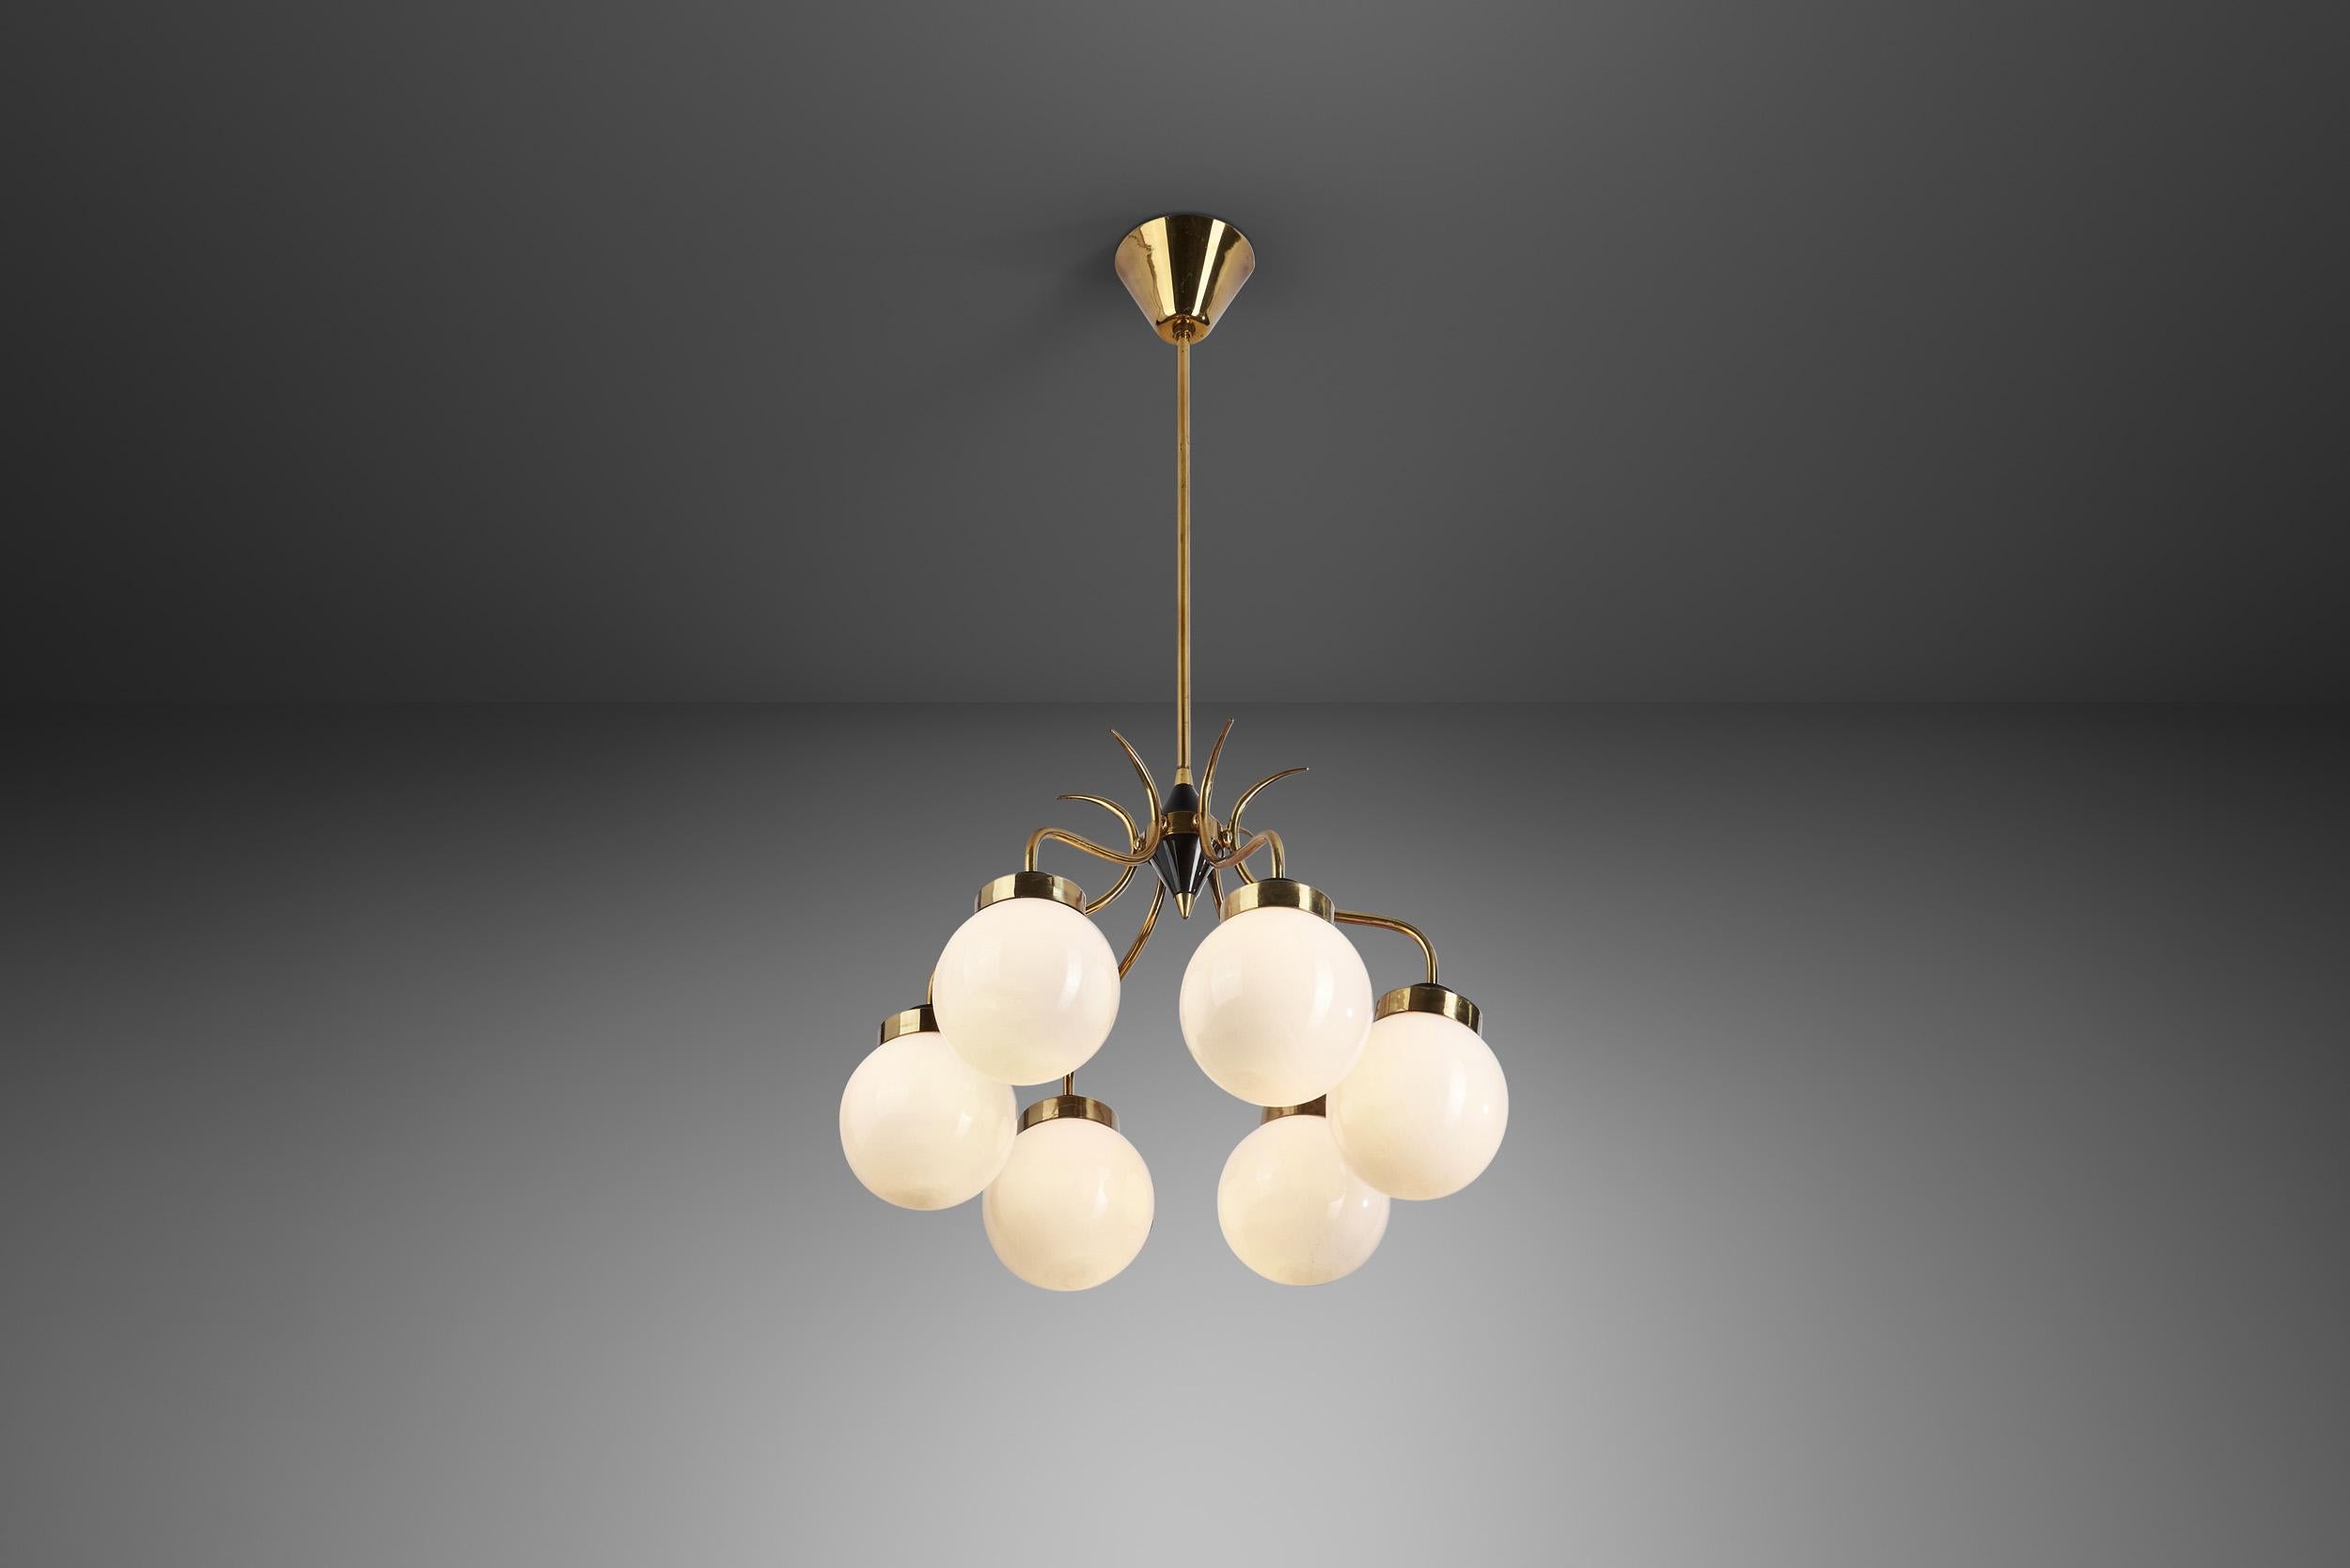 Sculptural Brass and Glass Ceiling Light, Scandinavia, 1950s In Good Condition For Sale In Utrecht, NL